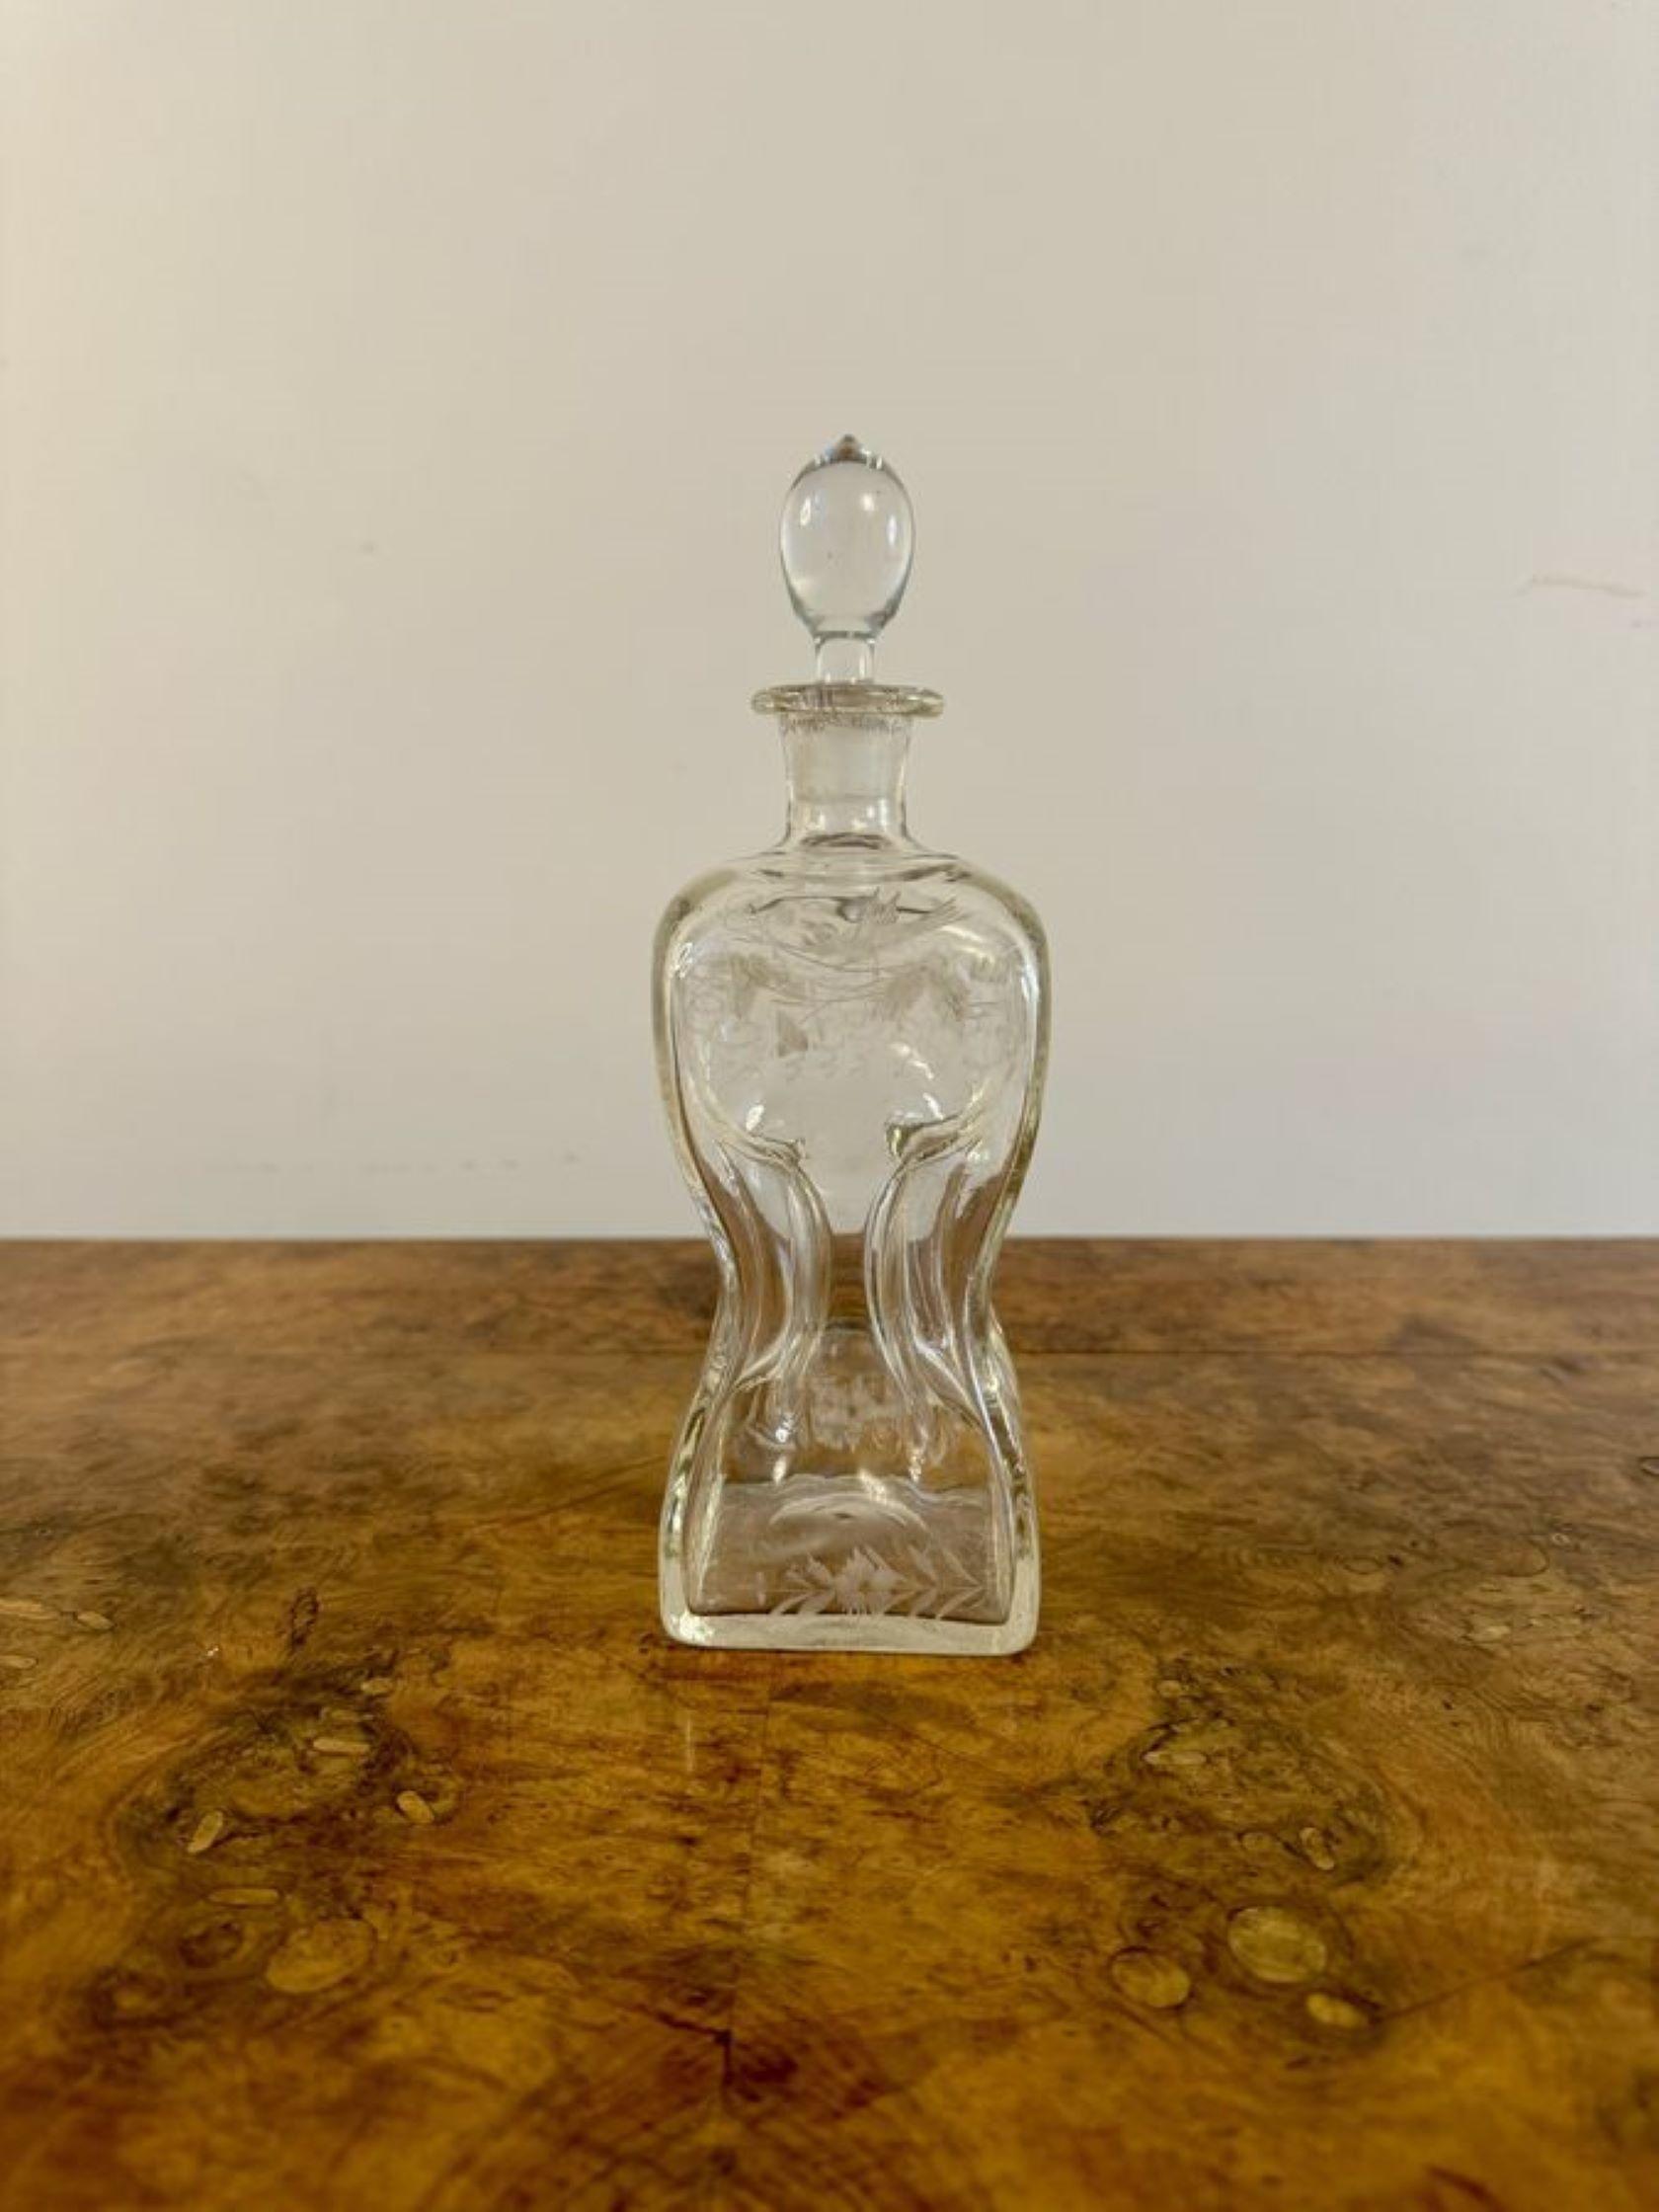 Stunning quality antique Victorian hourglass shaped decanter having a quality antique Victorian decanter, with an hour glass shaped body with etched glass detail with birds, flowers and trees to the top and bottom, with the original glass